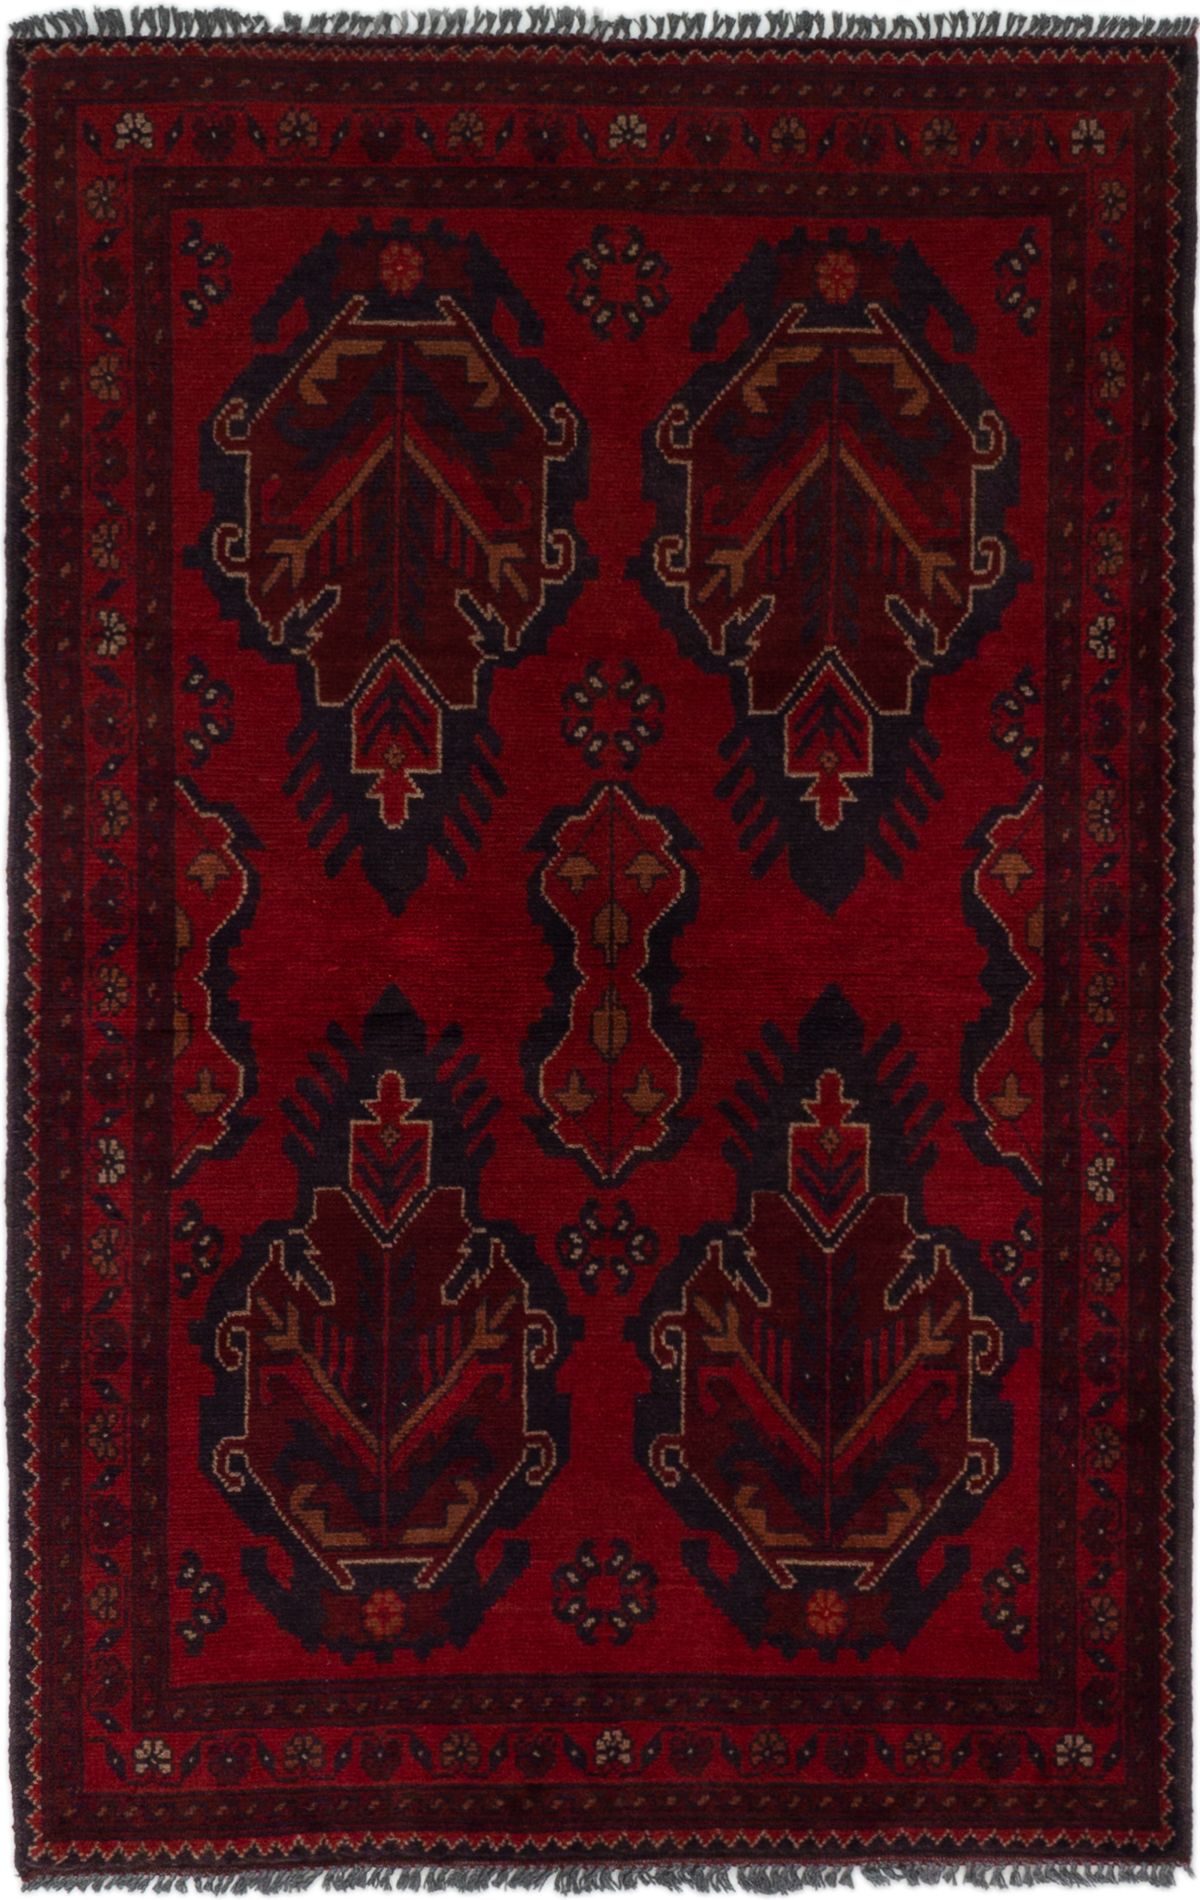 Hand-knotted Finest Khal Mohammadi Red Wool Rug 3'2" x 4'10"  Size: 3'2" x 4'10"  